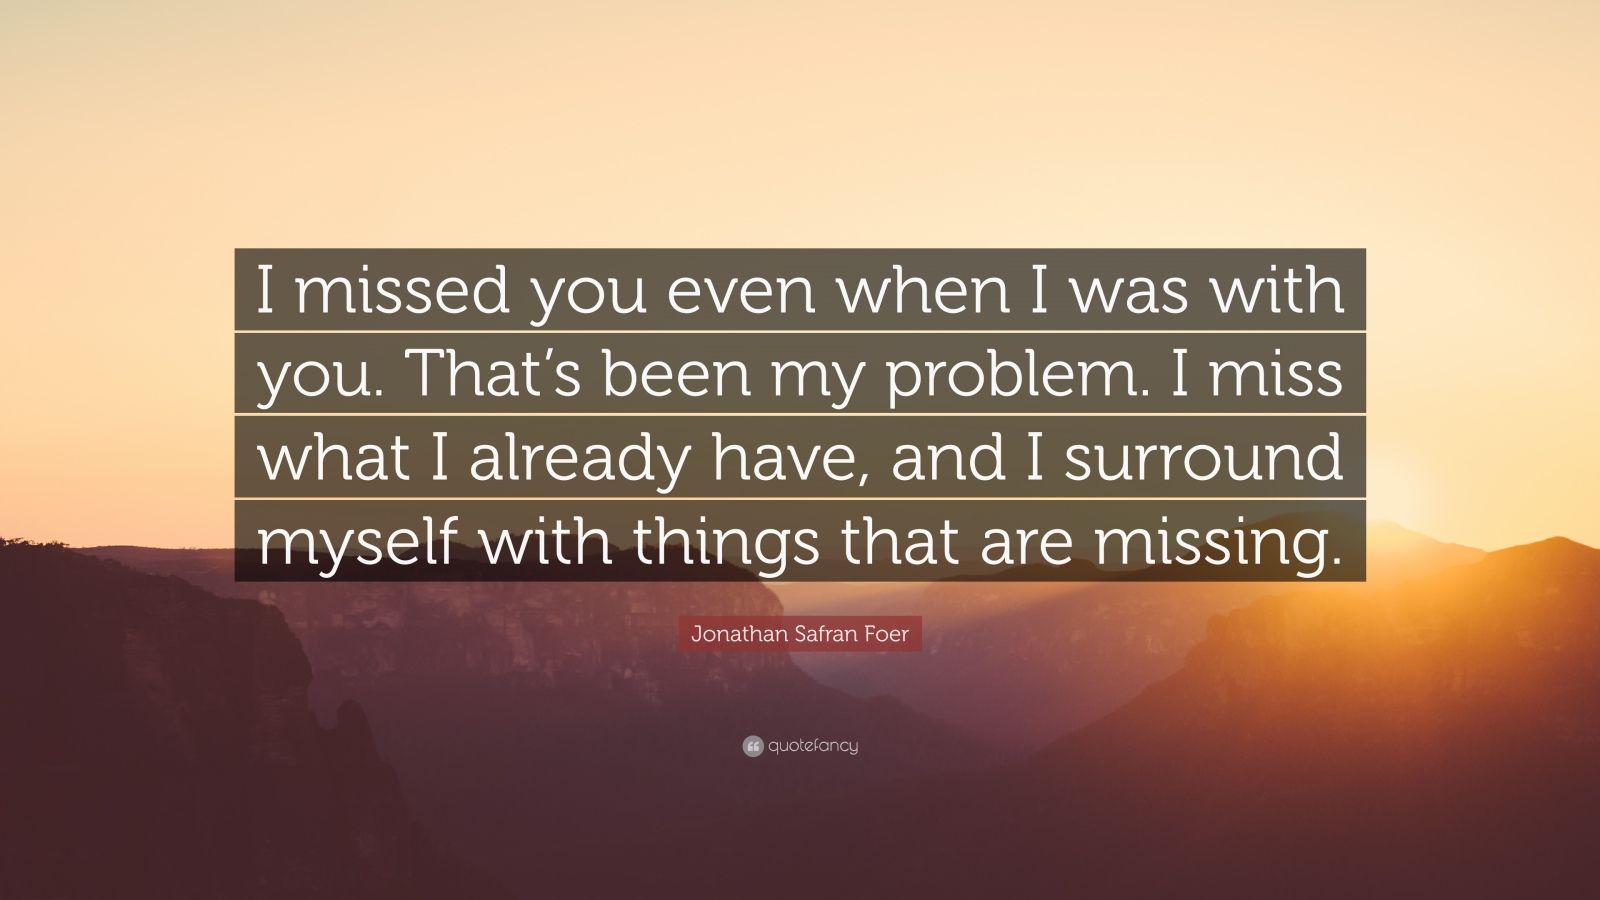 Jonathan Safran Foer Quote: “I missed you even when I was with you. That's been my problem. I miss what I already have, and I surround myself with th.” (7 wallpaper)